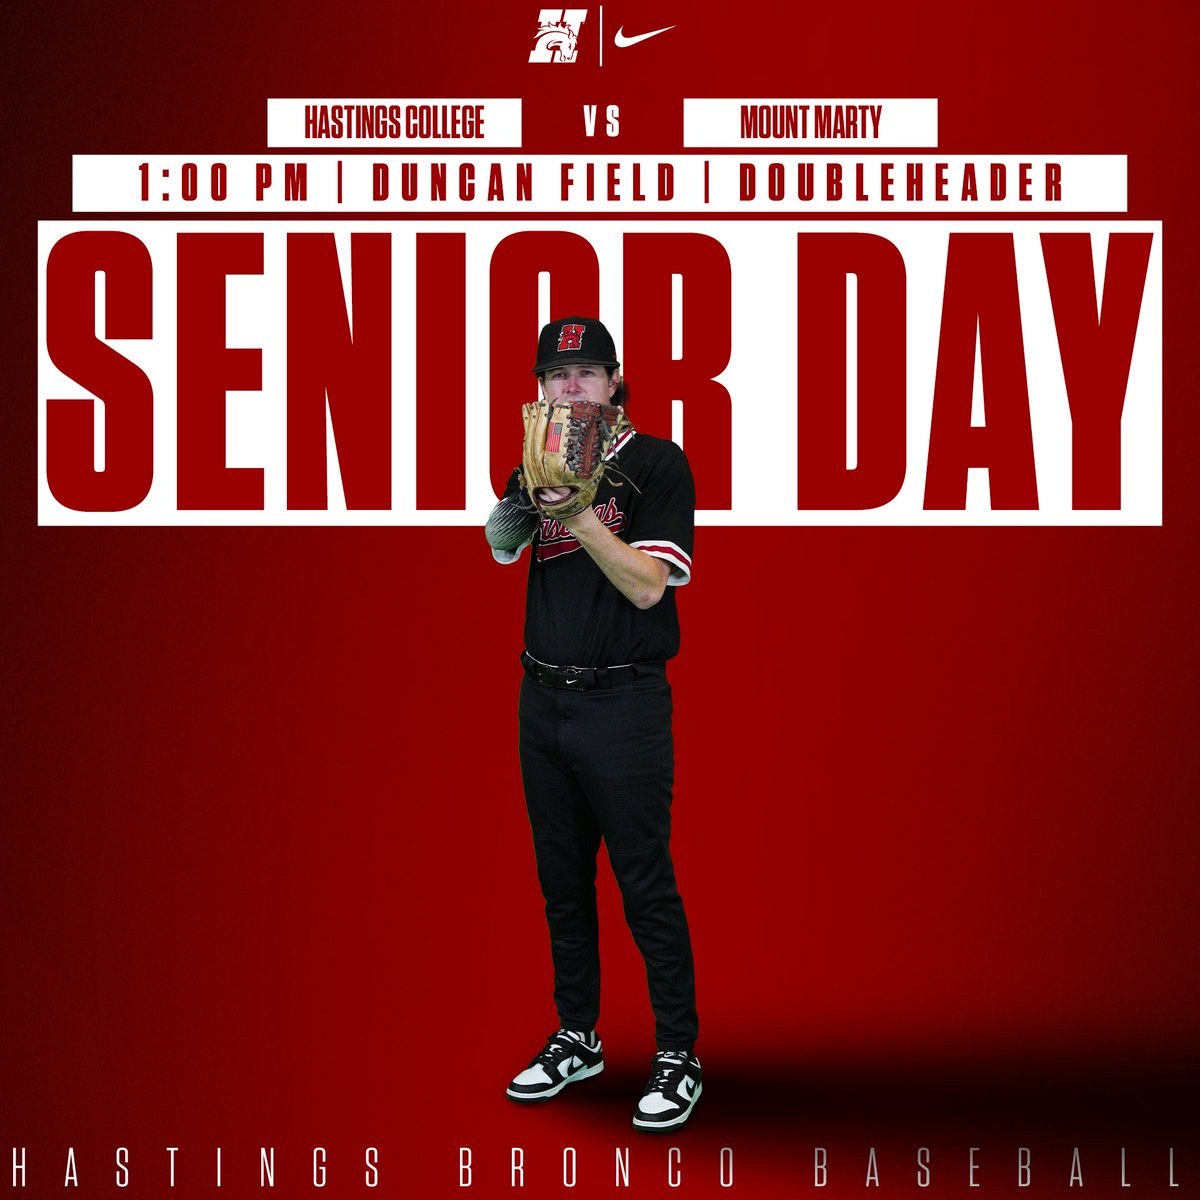 IT'S SENIOR DAY!! Get out to Duncan to help us celebrate our seniors today against Mount Marty! The Senior Day Ceremony will take place between games. 🎟️: hastingsbroncos.com/links/trnrw1 📺: hastingsbroncos.com/links/xakh10 📊: hastingsbroncos.com/sports/bsb/202… #GDTBAB